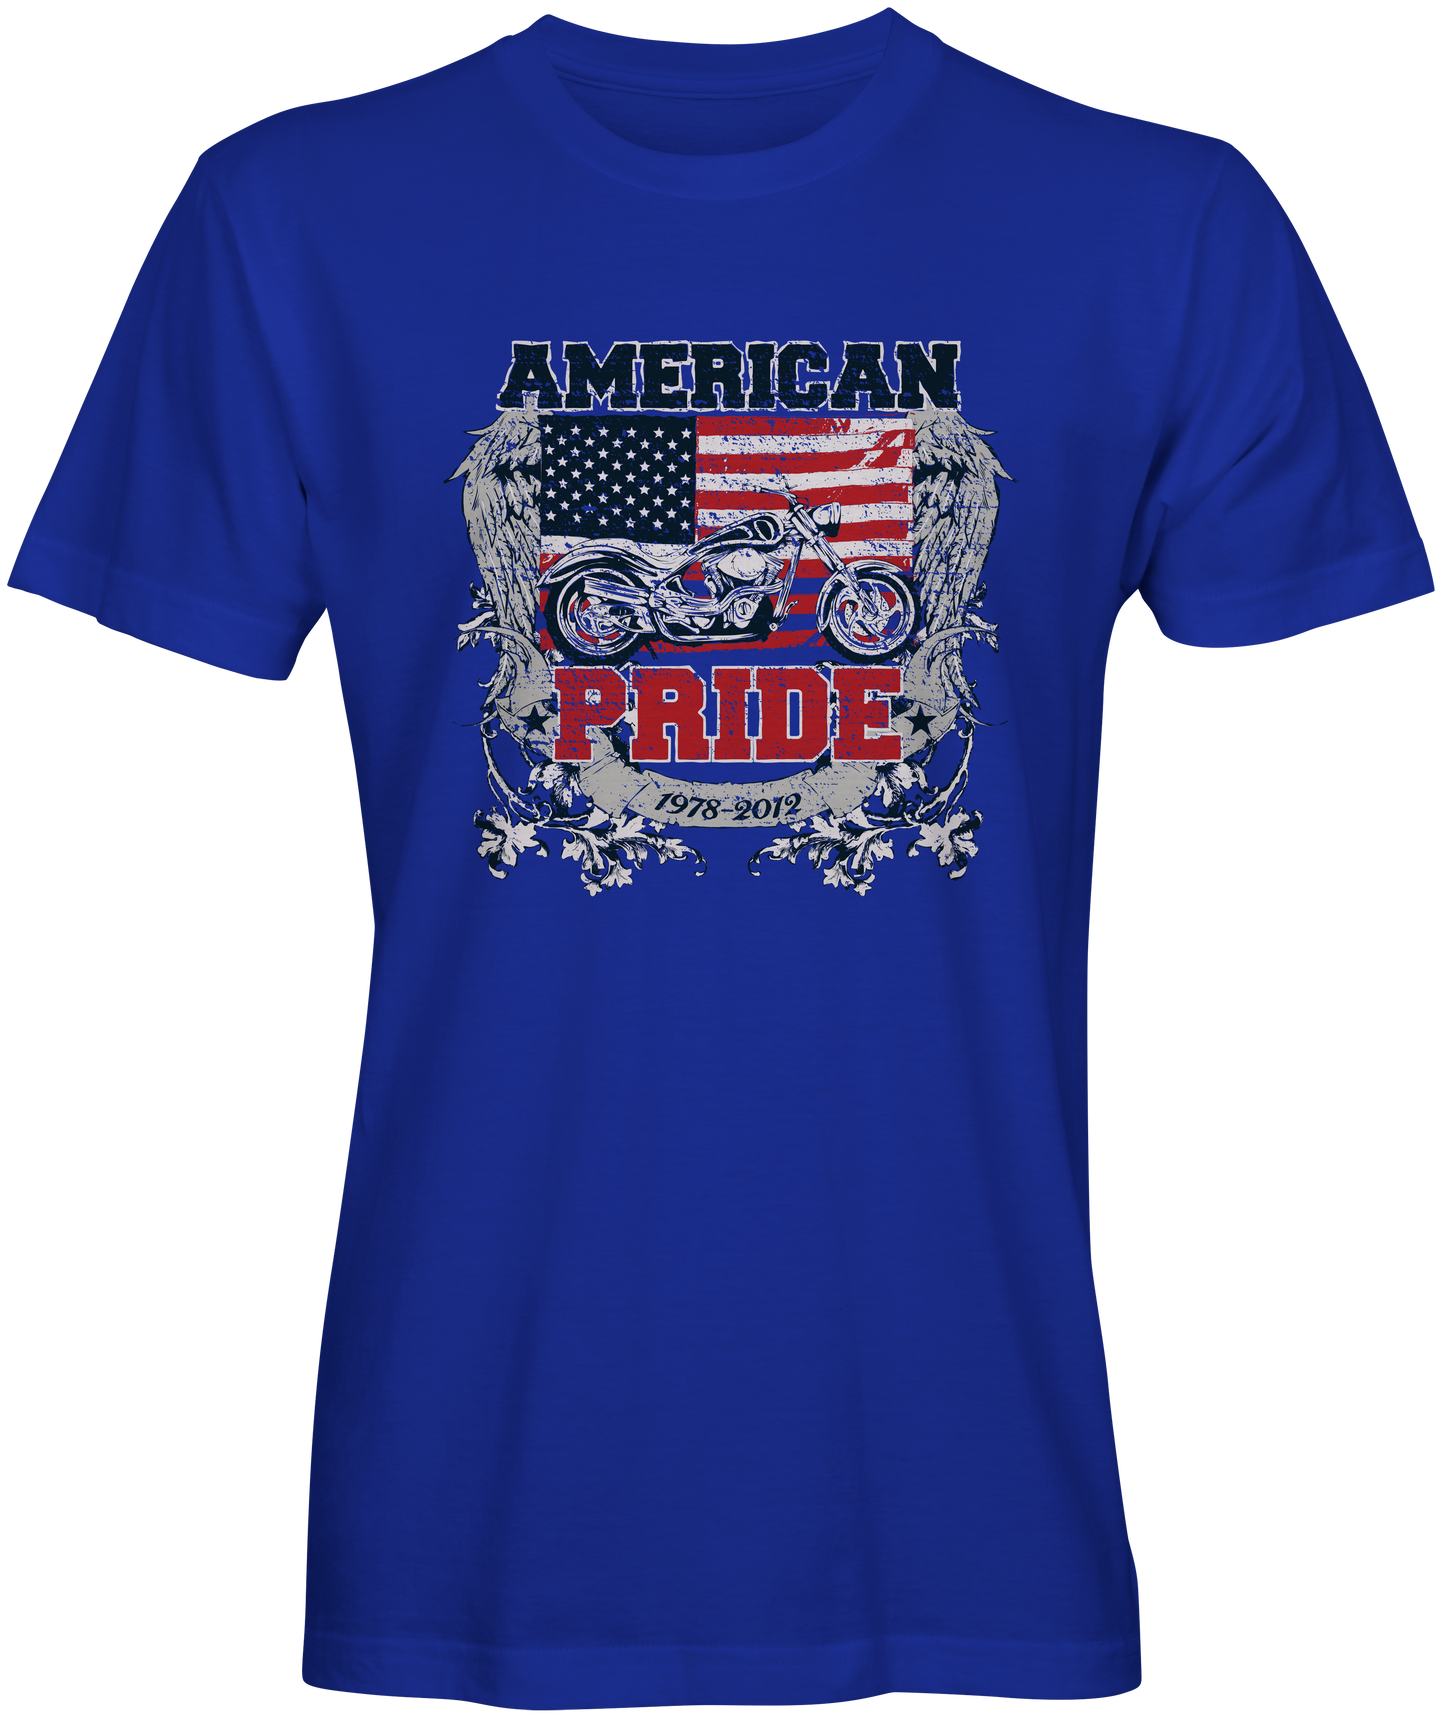 American Pride Graphic Tee